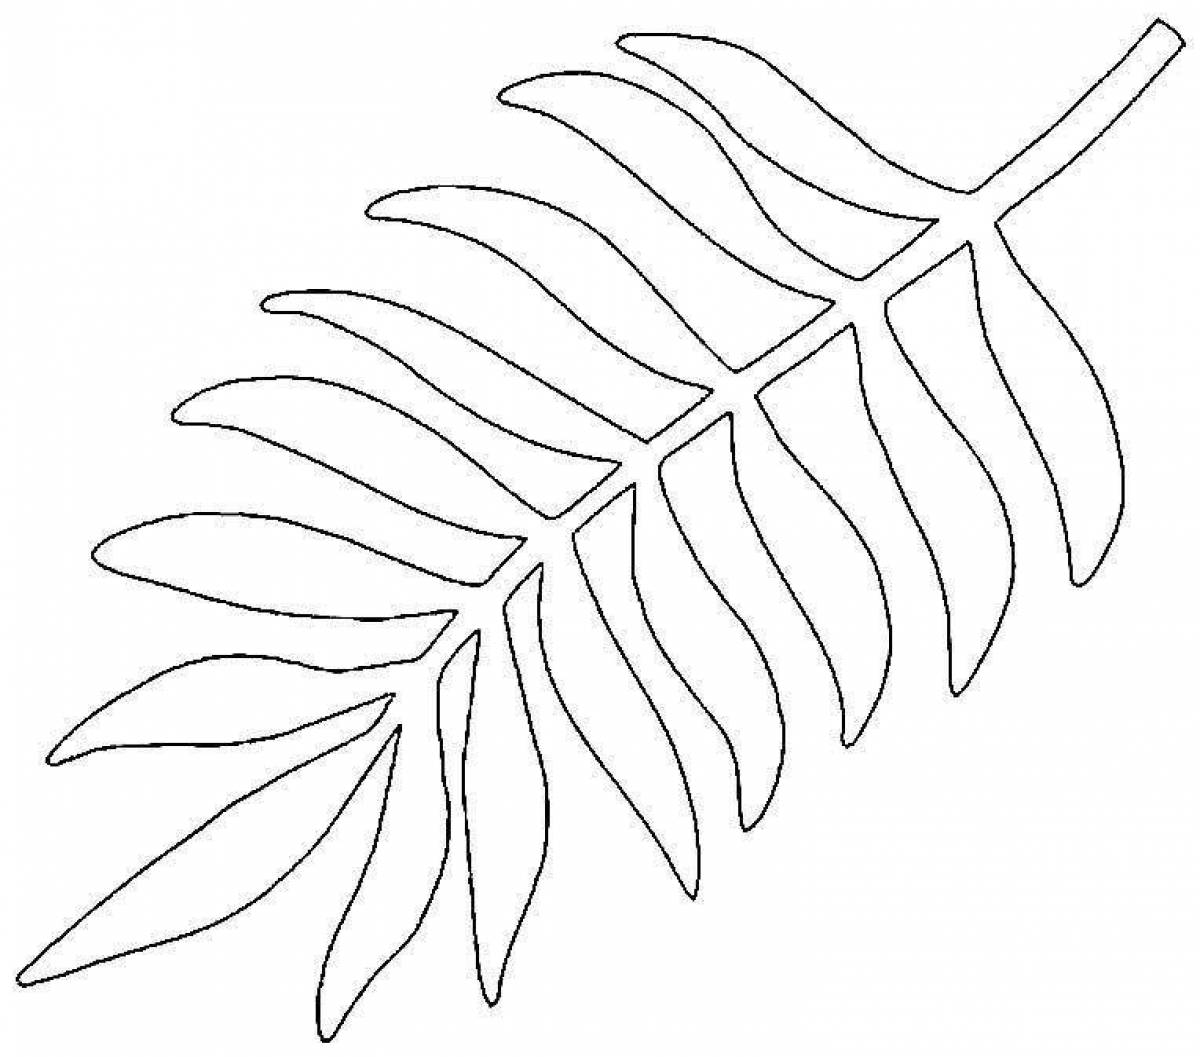 Awesome monstera leaf coloring page